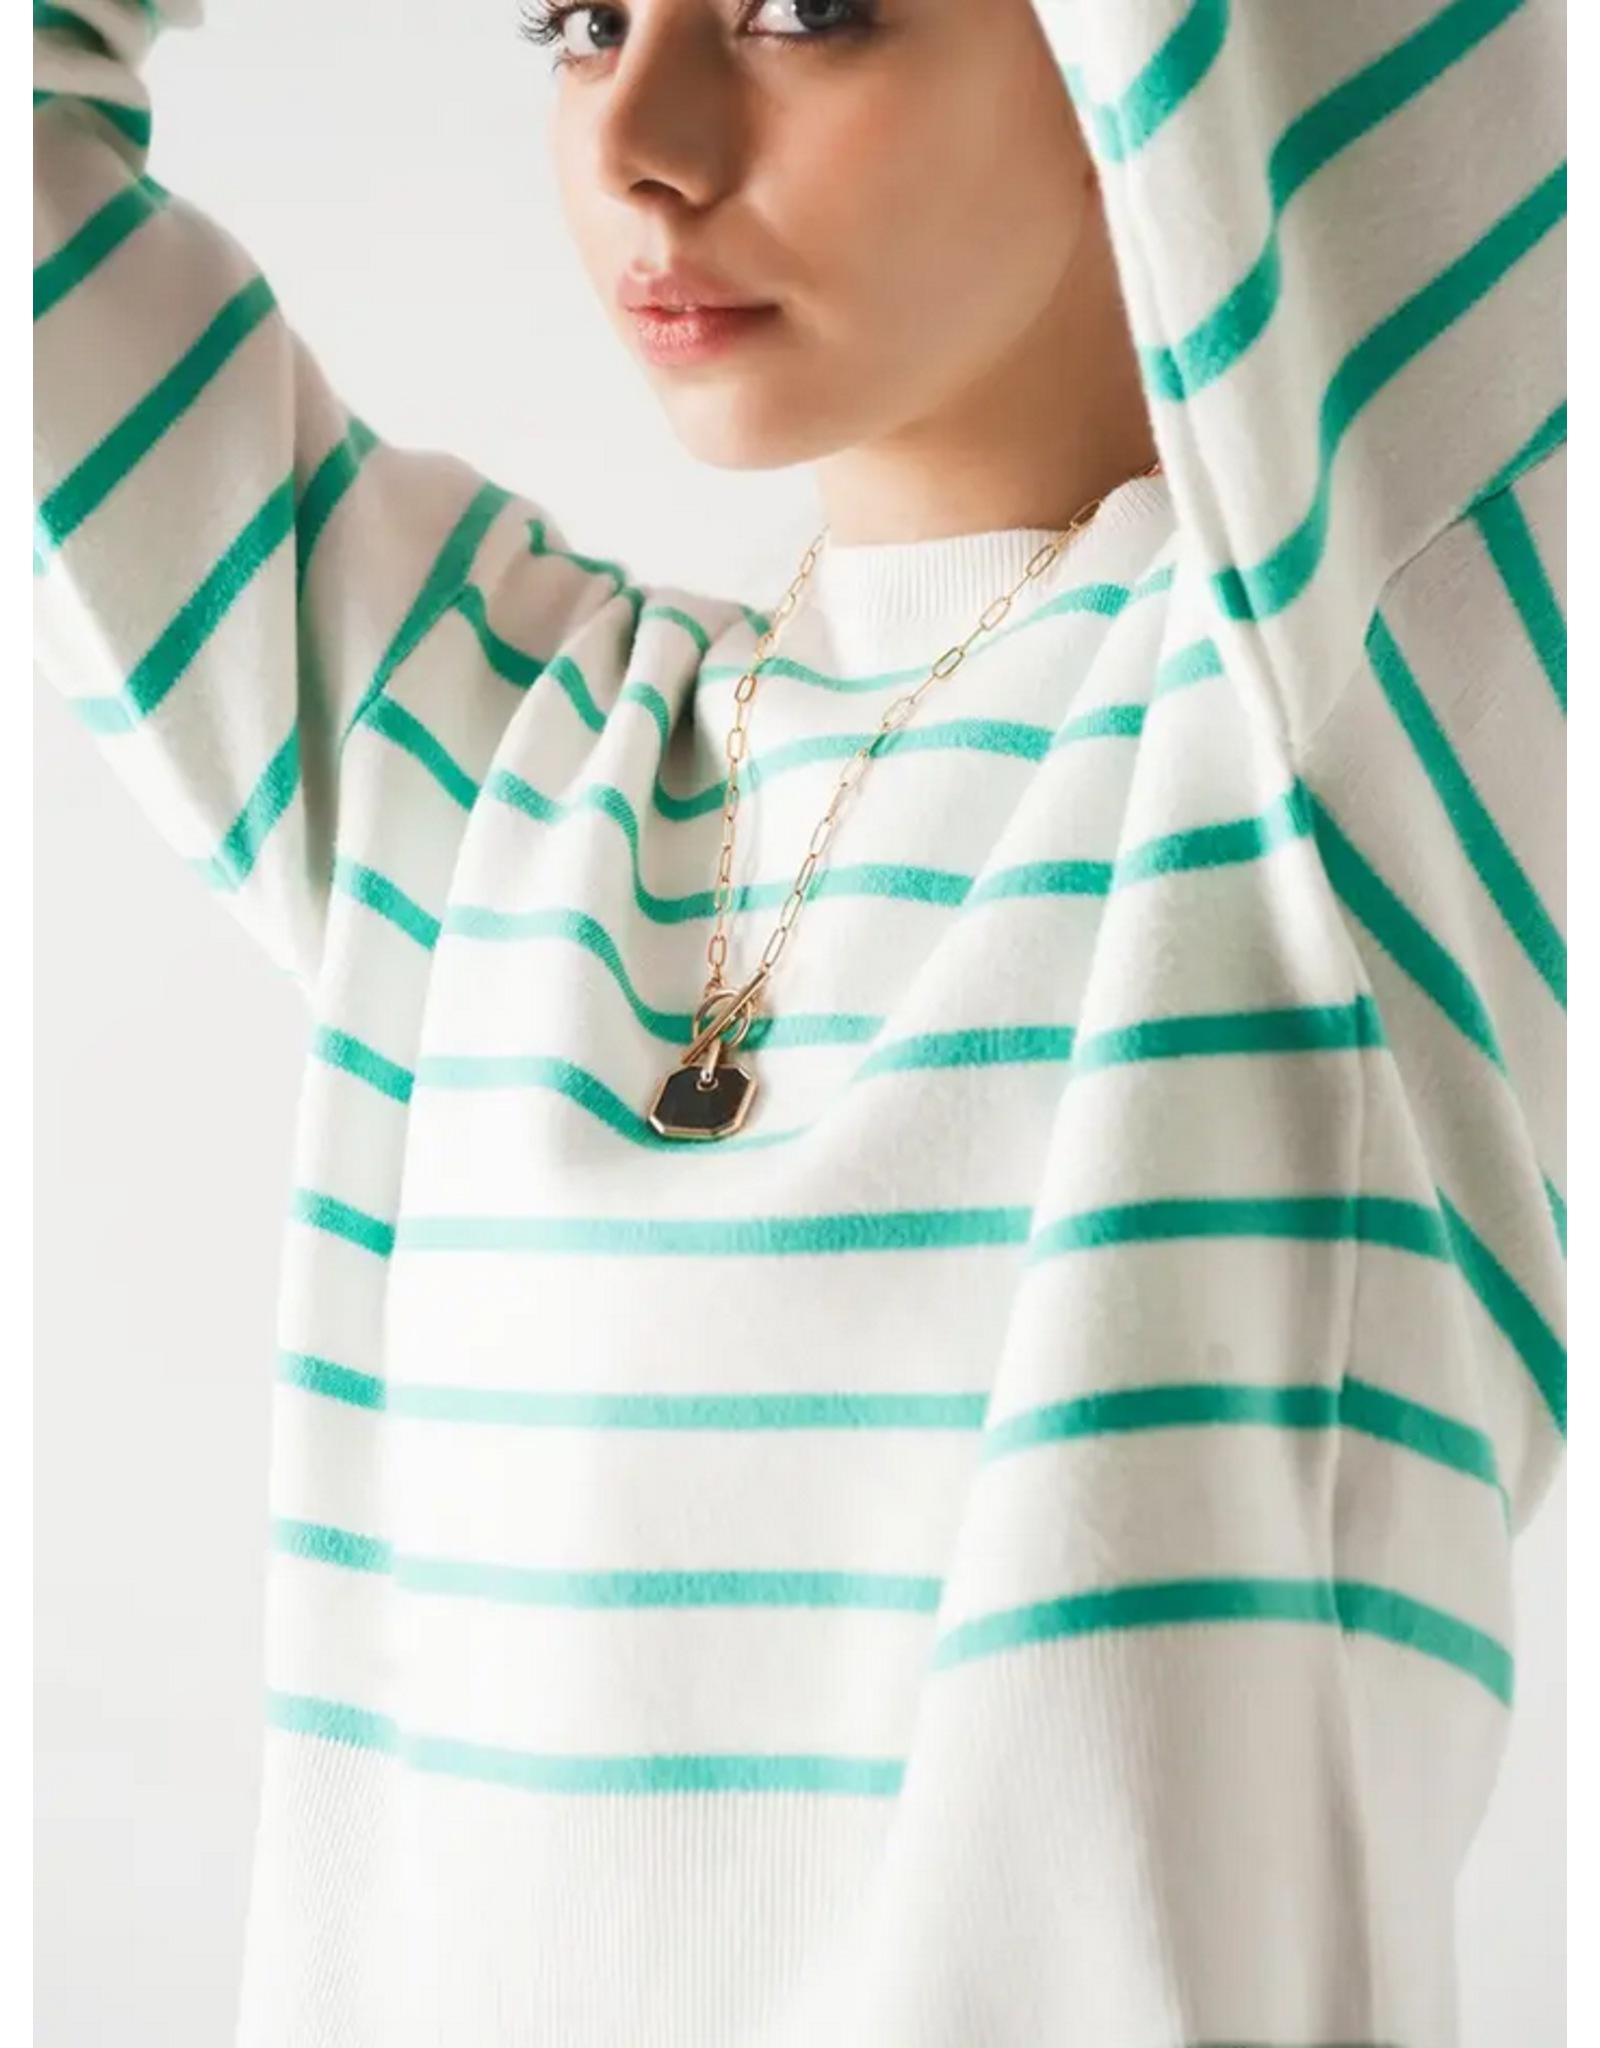 Q2 White & Turquoise Striped Sweater